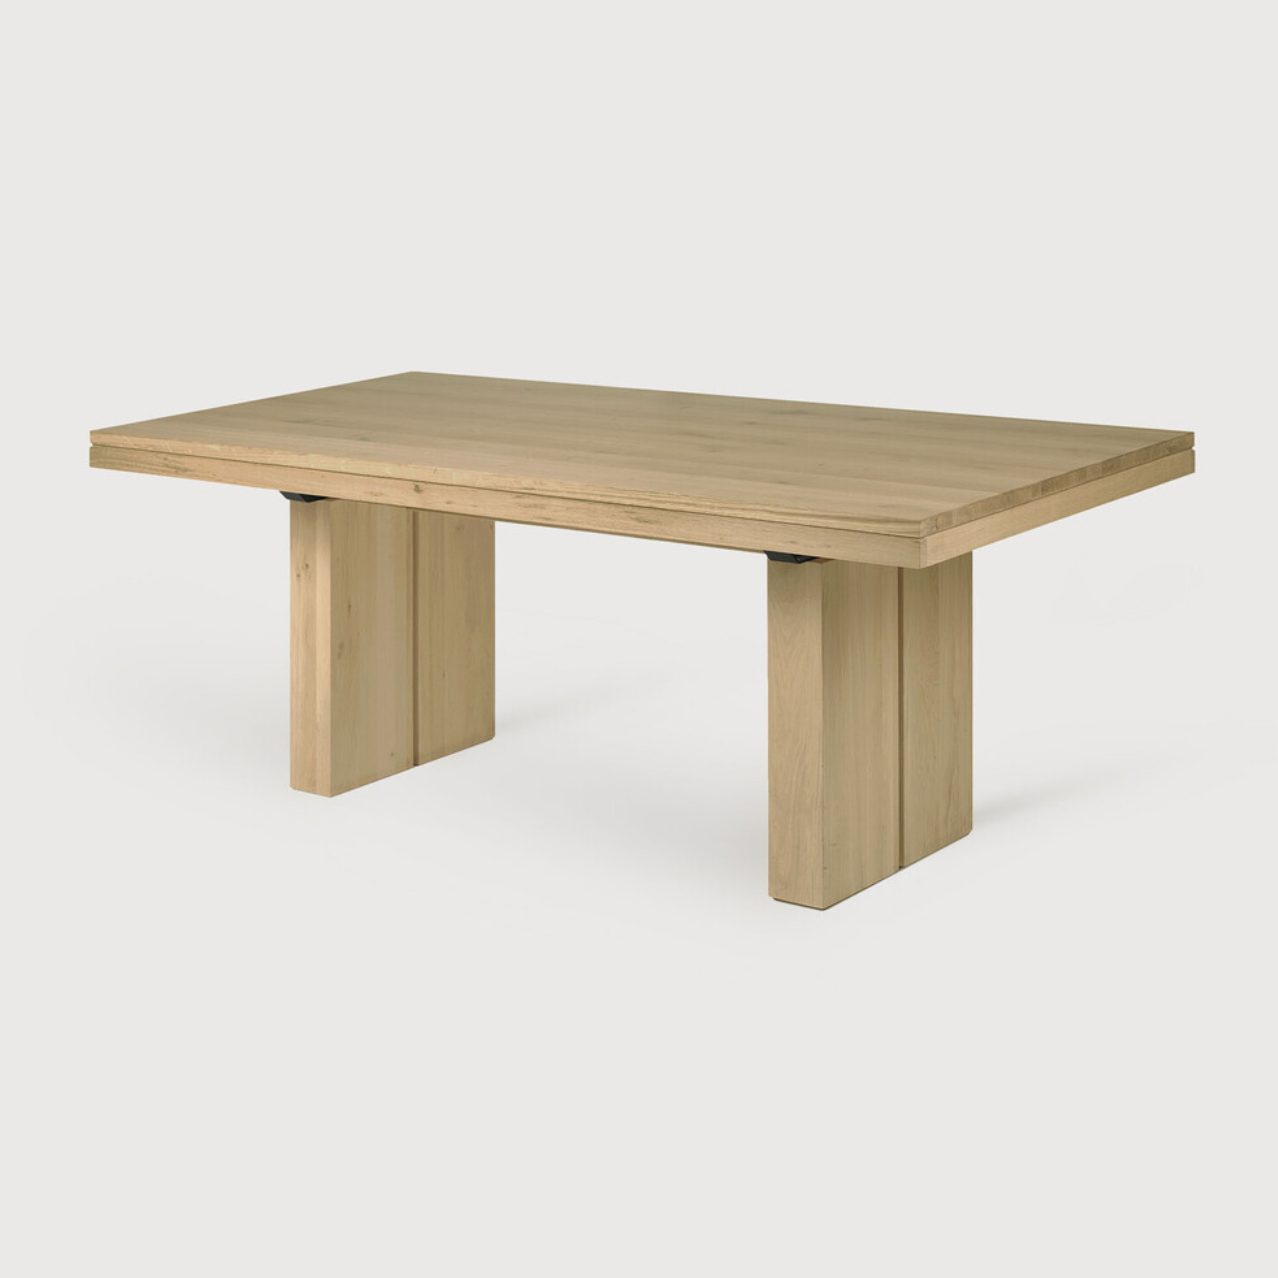 We love the solid look and pure lines of this Oak Double Extendable Dining Table.   Although the table looks heavy, it can very easily be extended single-handedly. It takes a few steps and no more than seconds to make space for whatever will be happening next in your home!  Material: Oak, 100% Solid Wood Finish: Oak  